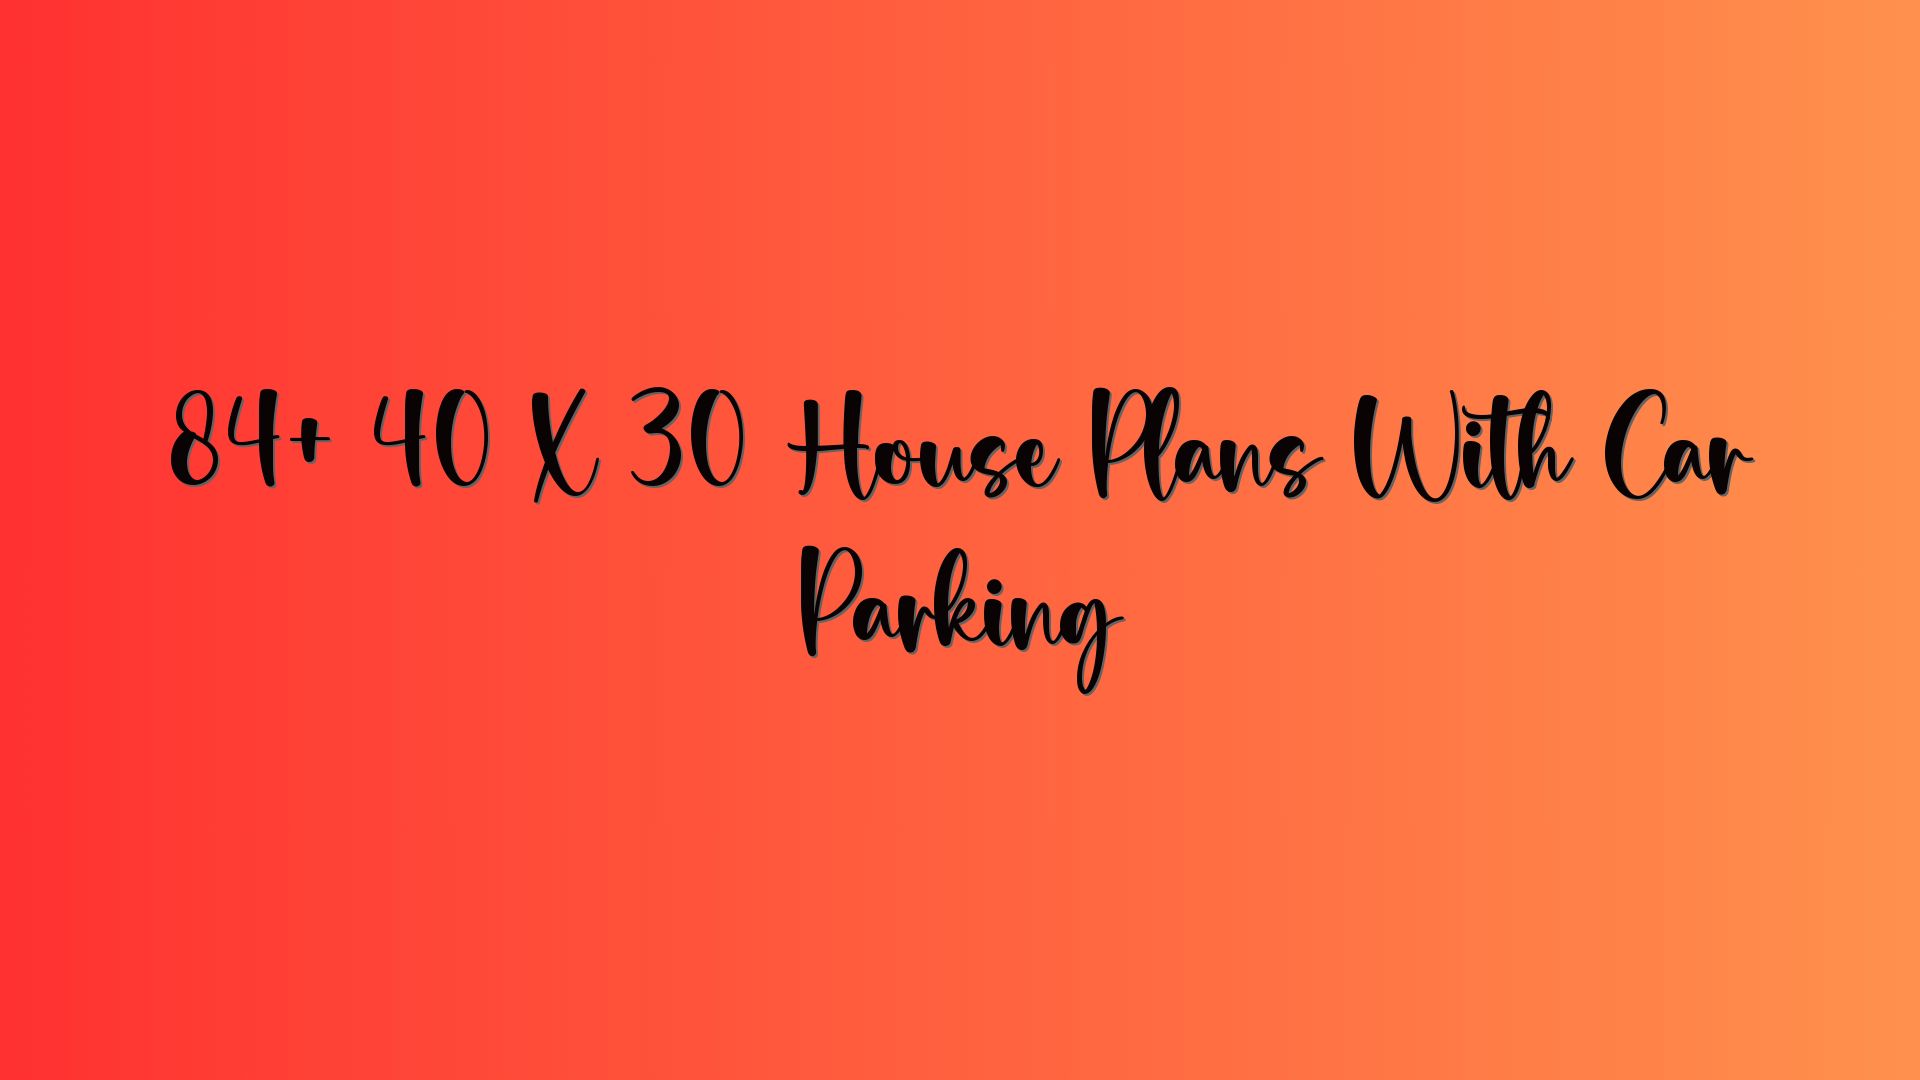 84+ 40 X 30 House Plans With Car Parking